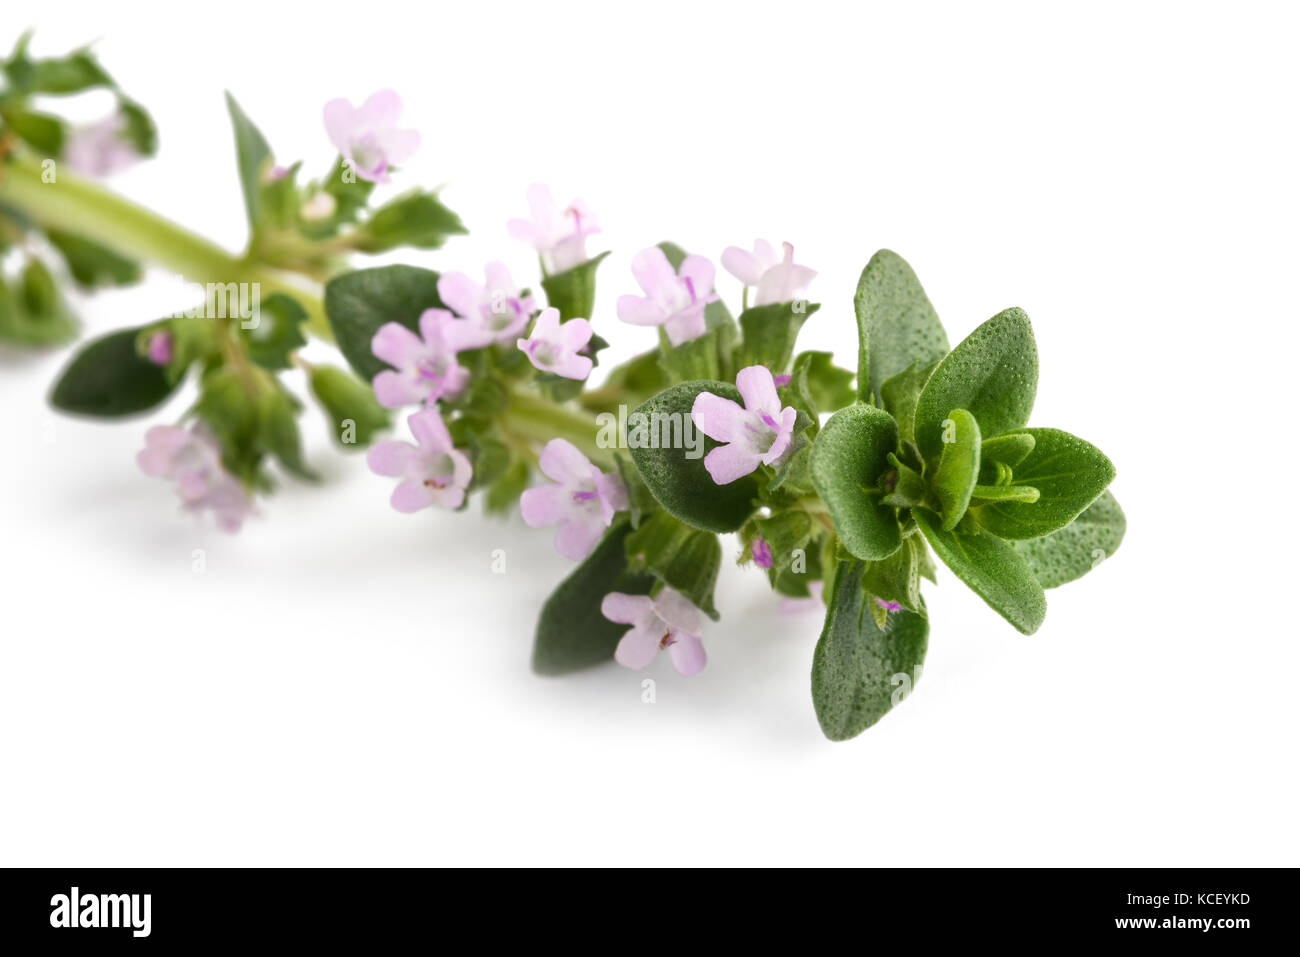 thyme with flowers isolated on white background Stock Photo